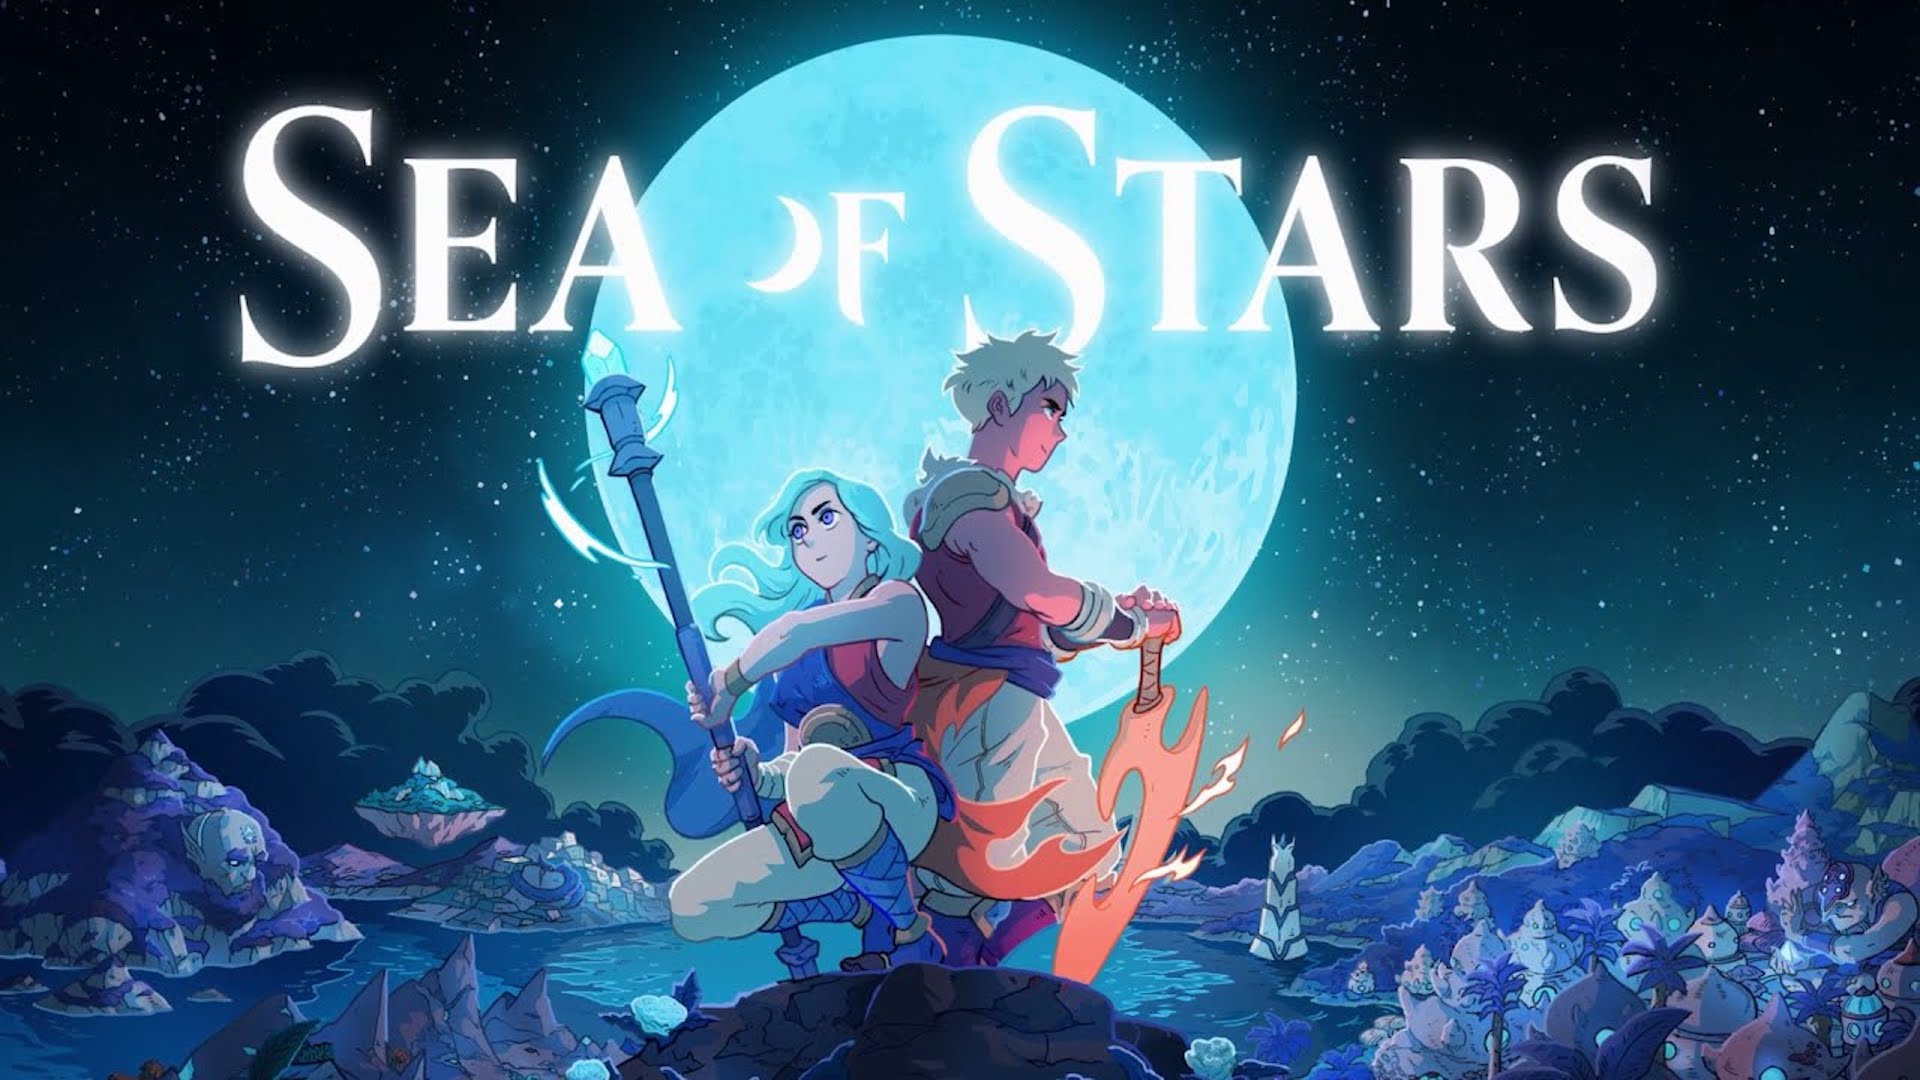 A new Sea of Stars trailer has been released, revealing a new character